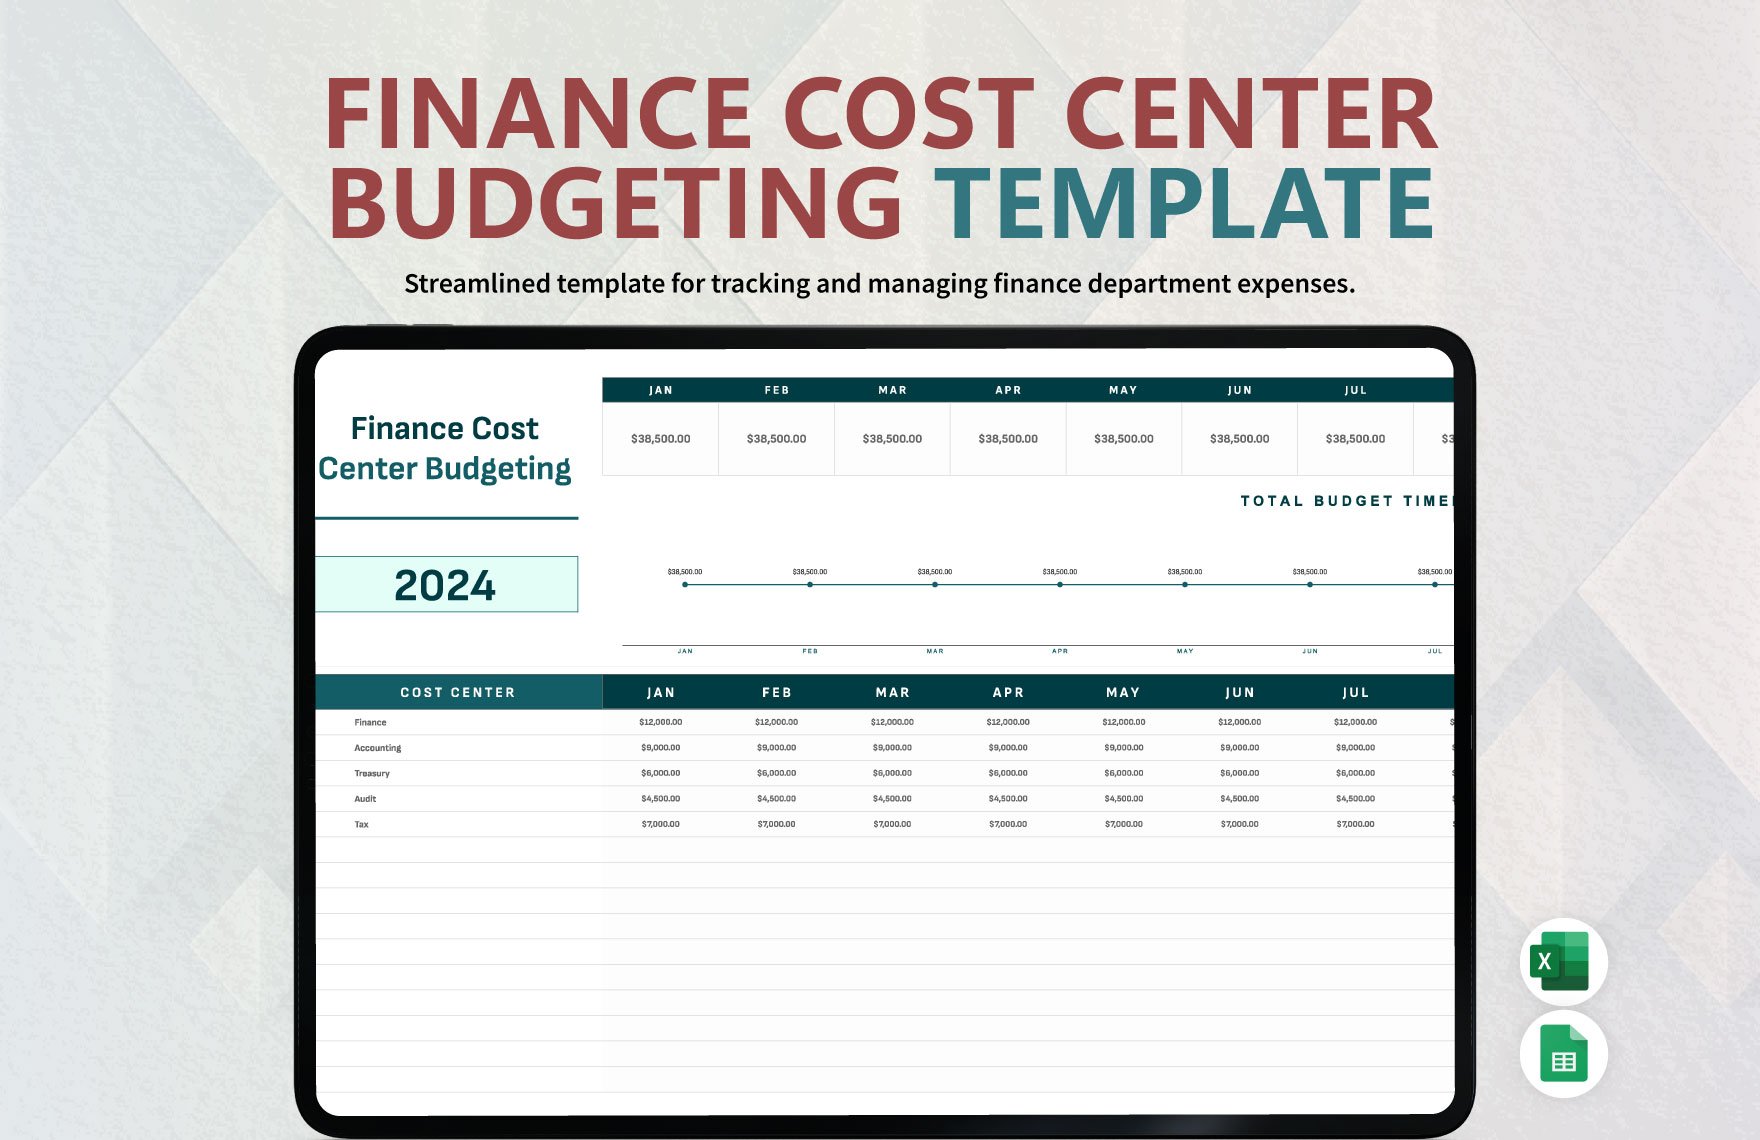 Finance Cost Center Budgeting Template